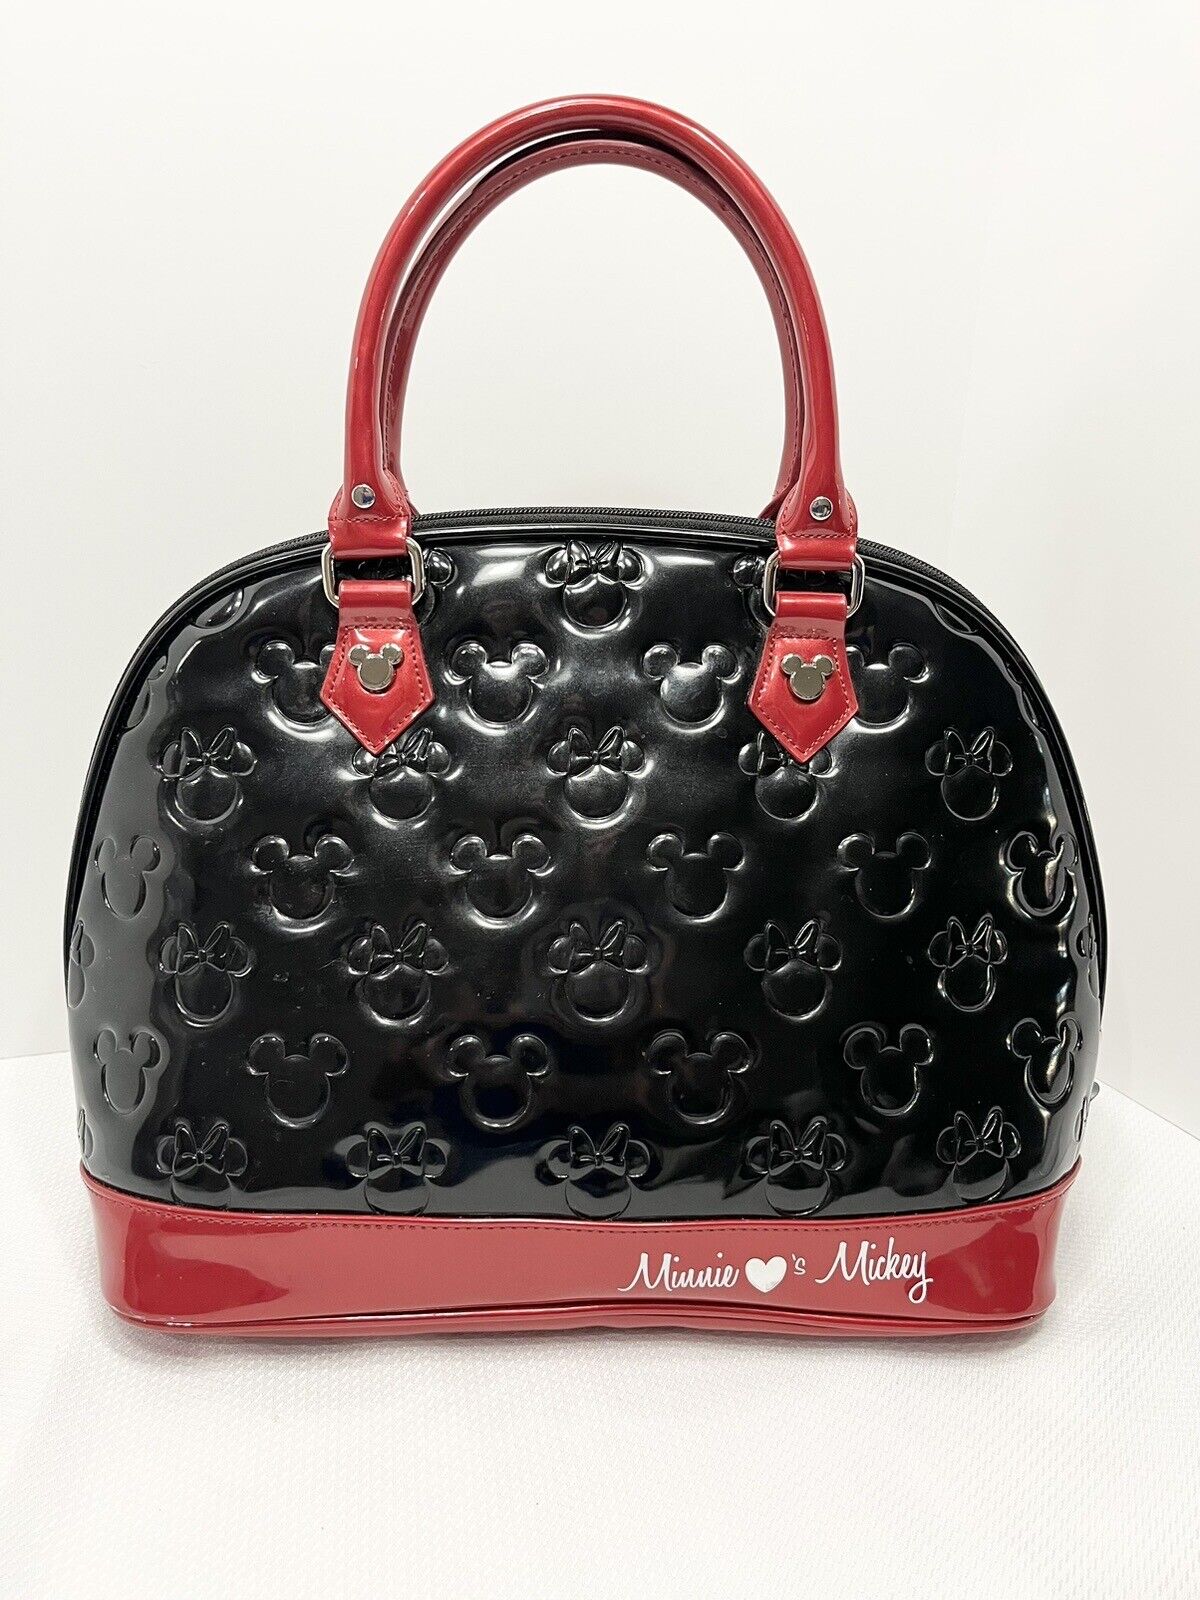 Loungefly Disney Minnie Loves Mickey Embossed Patent Leather Black & Red Handbag